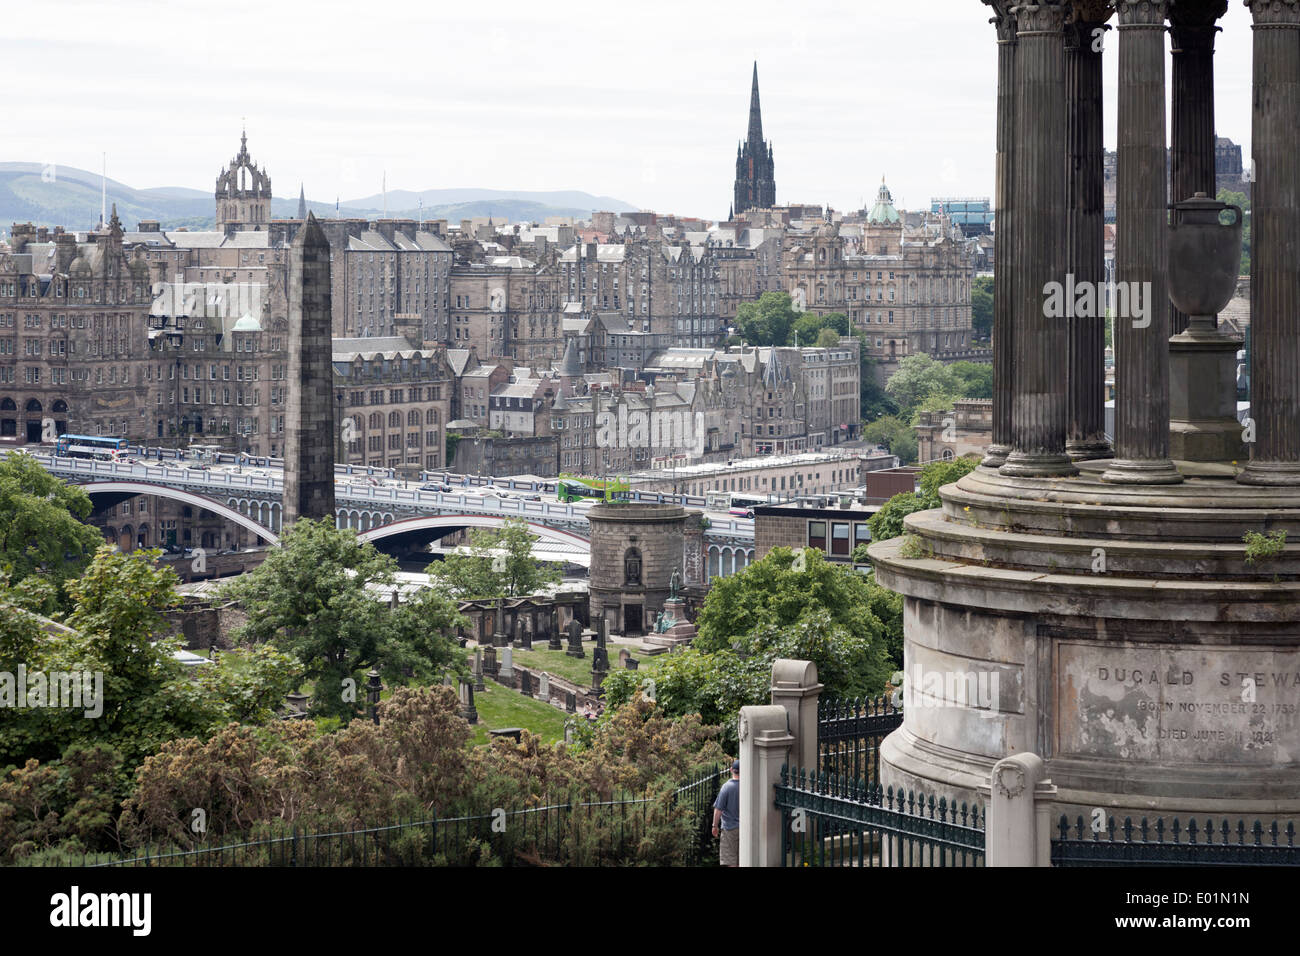 View of Edinburgh Old Town including the North Bridge from Calton Hill. Dugald Stewart Monument in the foreground right. Stock Photo